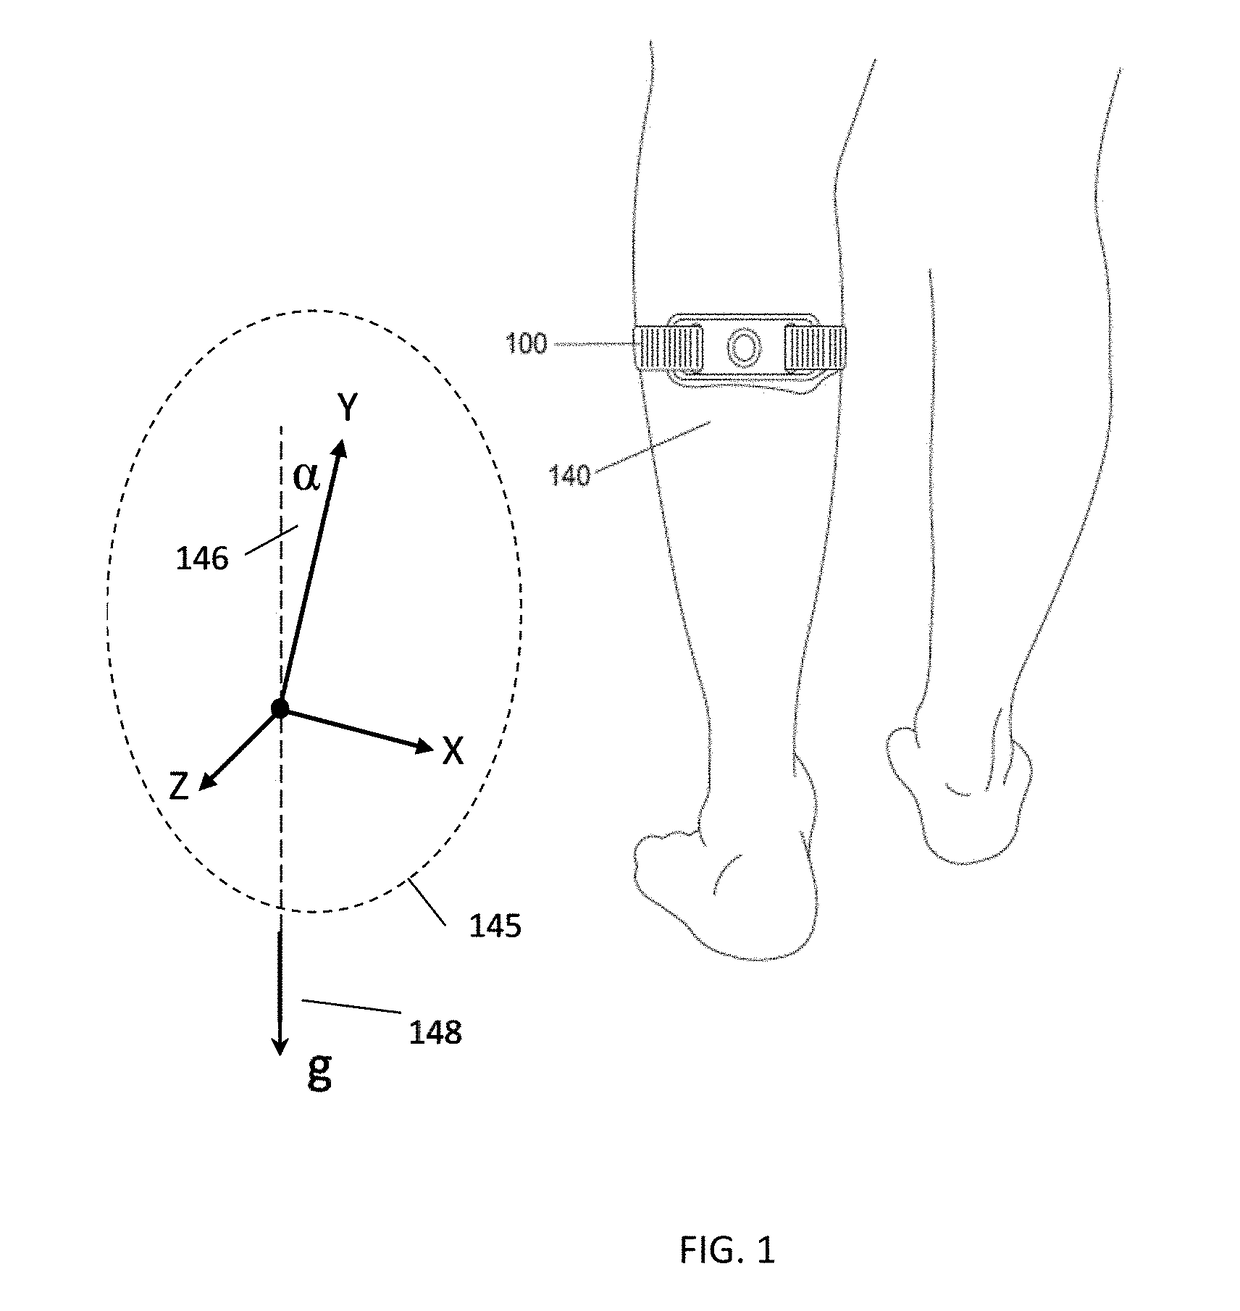 Apparatus and method for activity monitoring, gait analysis, and balance assessment for users of a transcutaneous electrical nerve stimulation (TENS) device